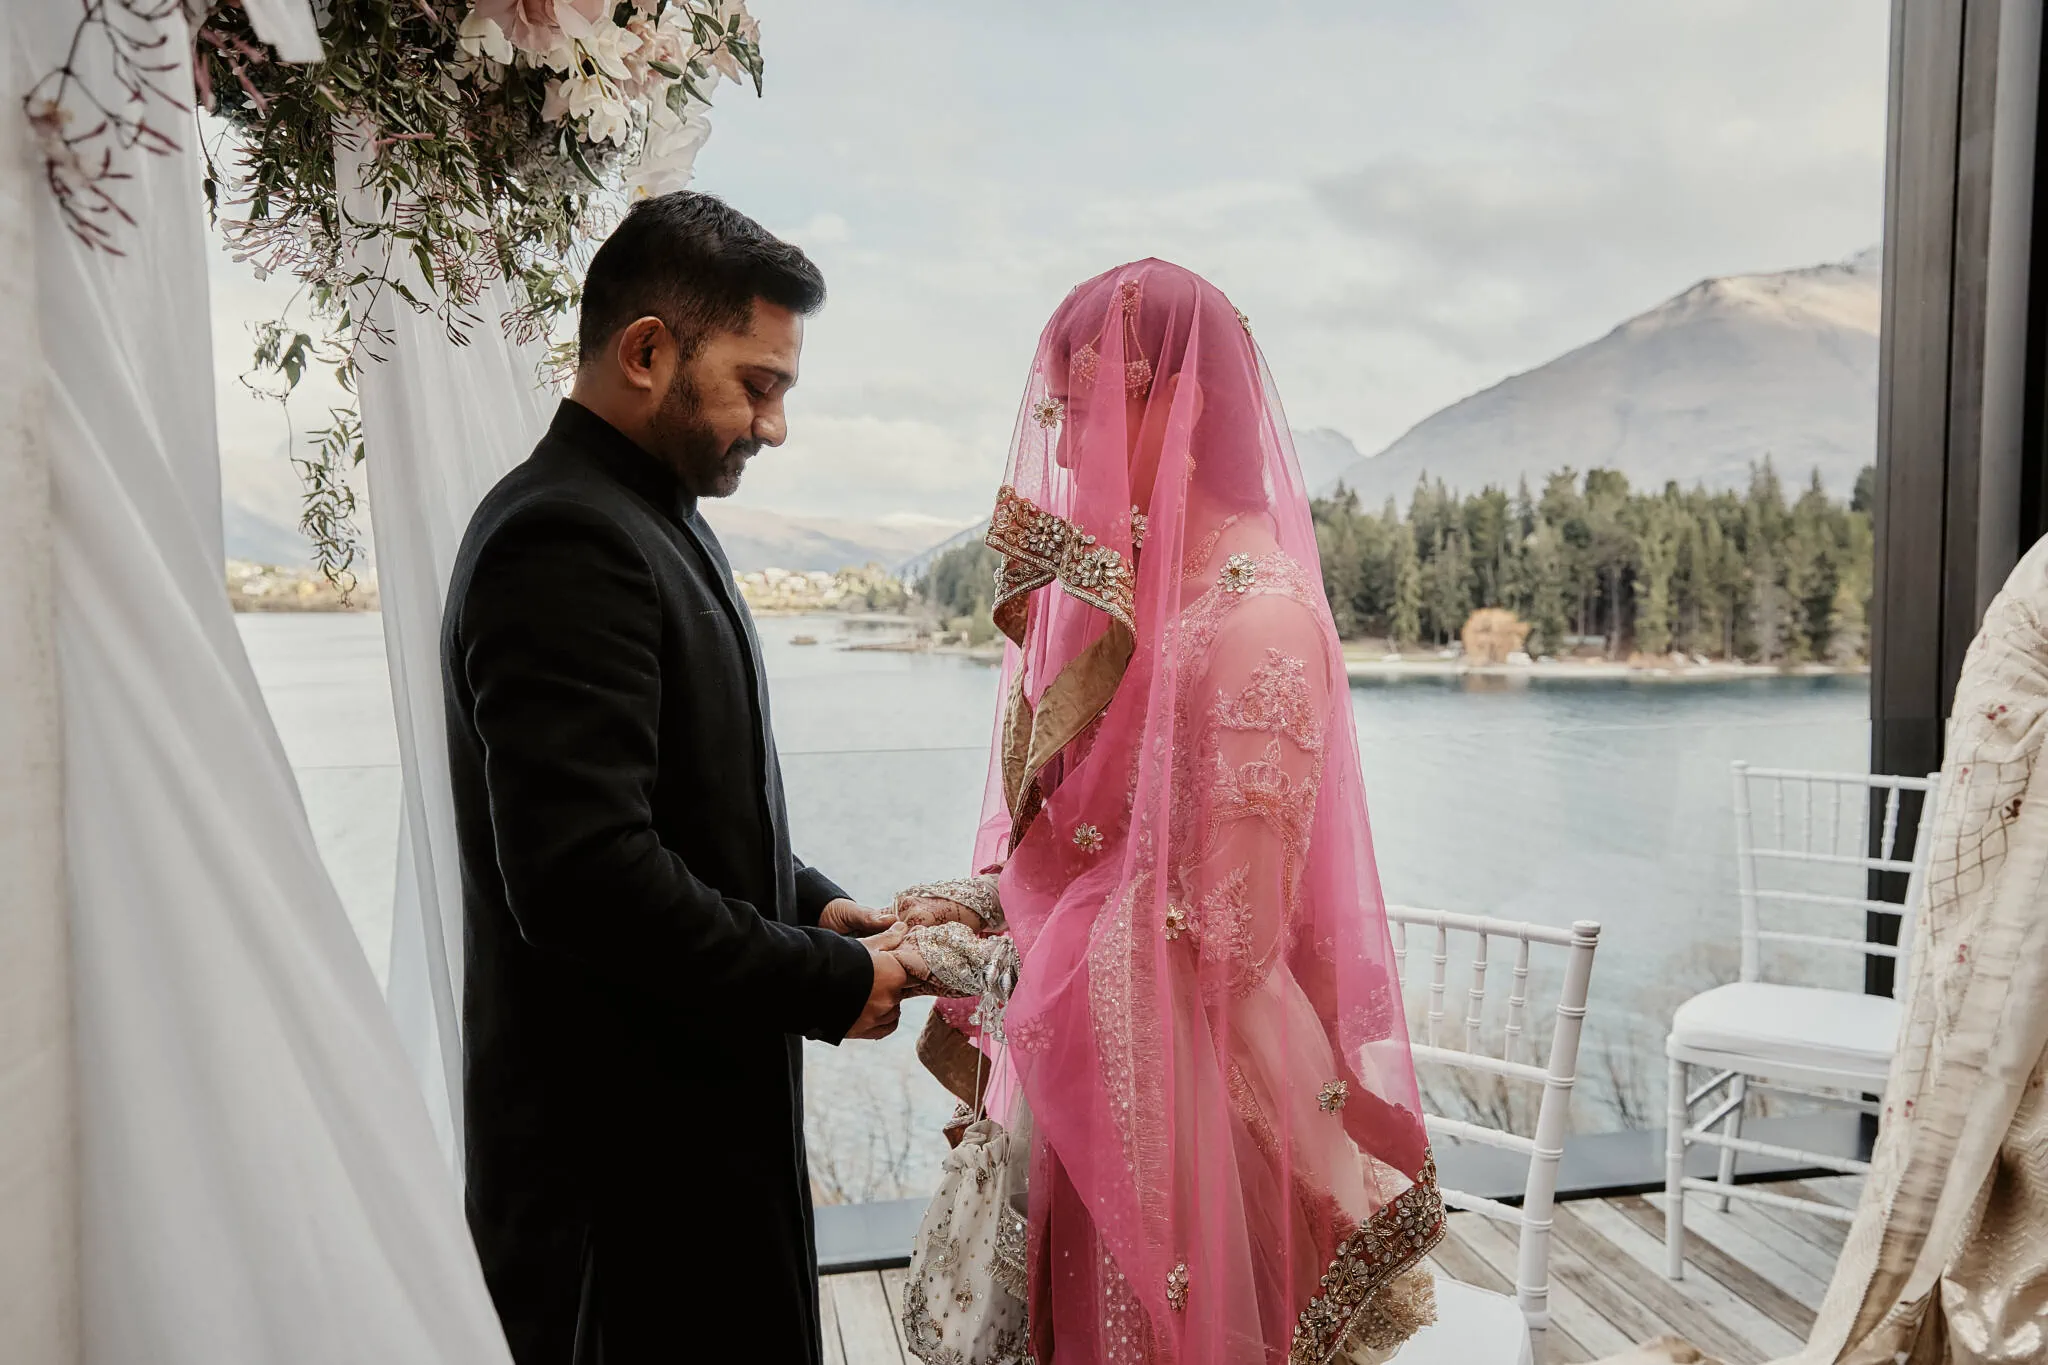 Queenstown New Zealand Elopement Wedding Photographer - Wasim and Yumn have a Queenstown Islamic wedding ceremony in front of a lake.